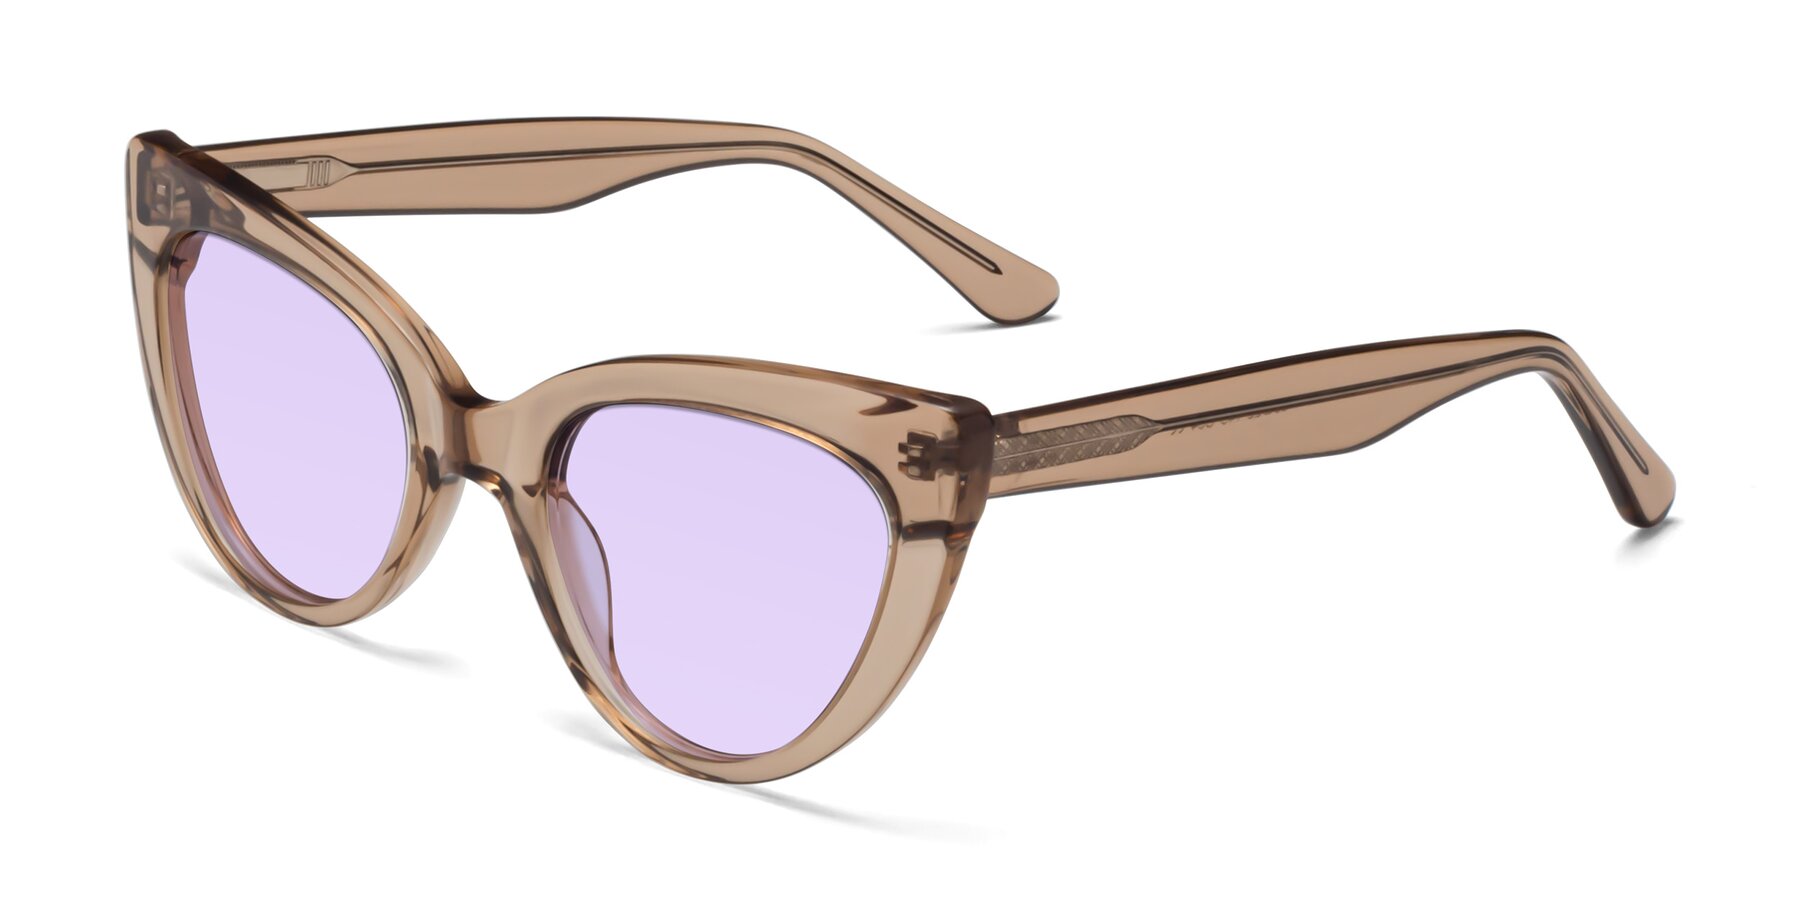 Angle of Tiesi in Caramel with Light Purple Tinted Lenses